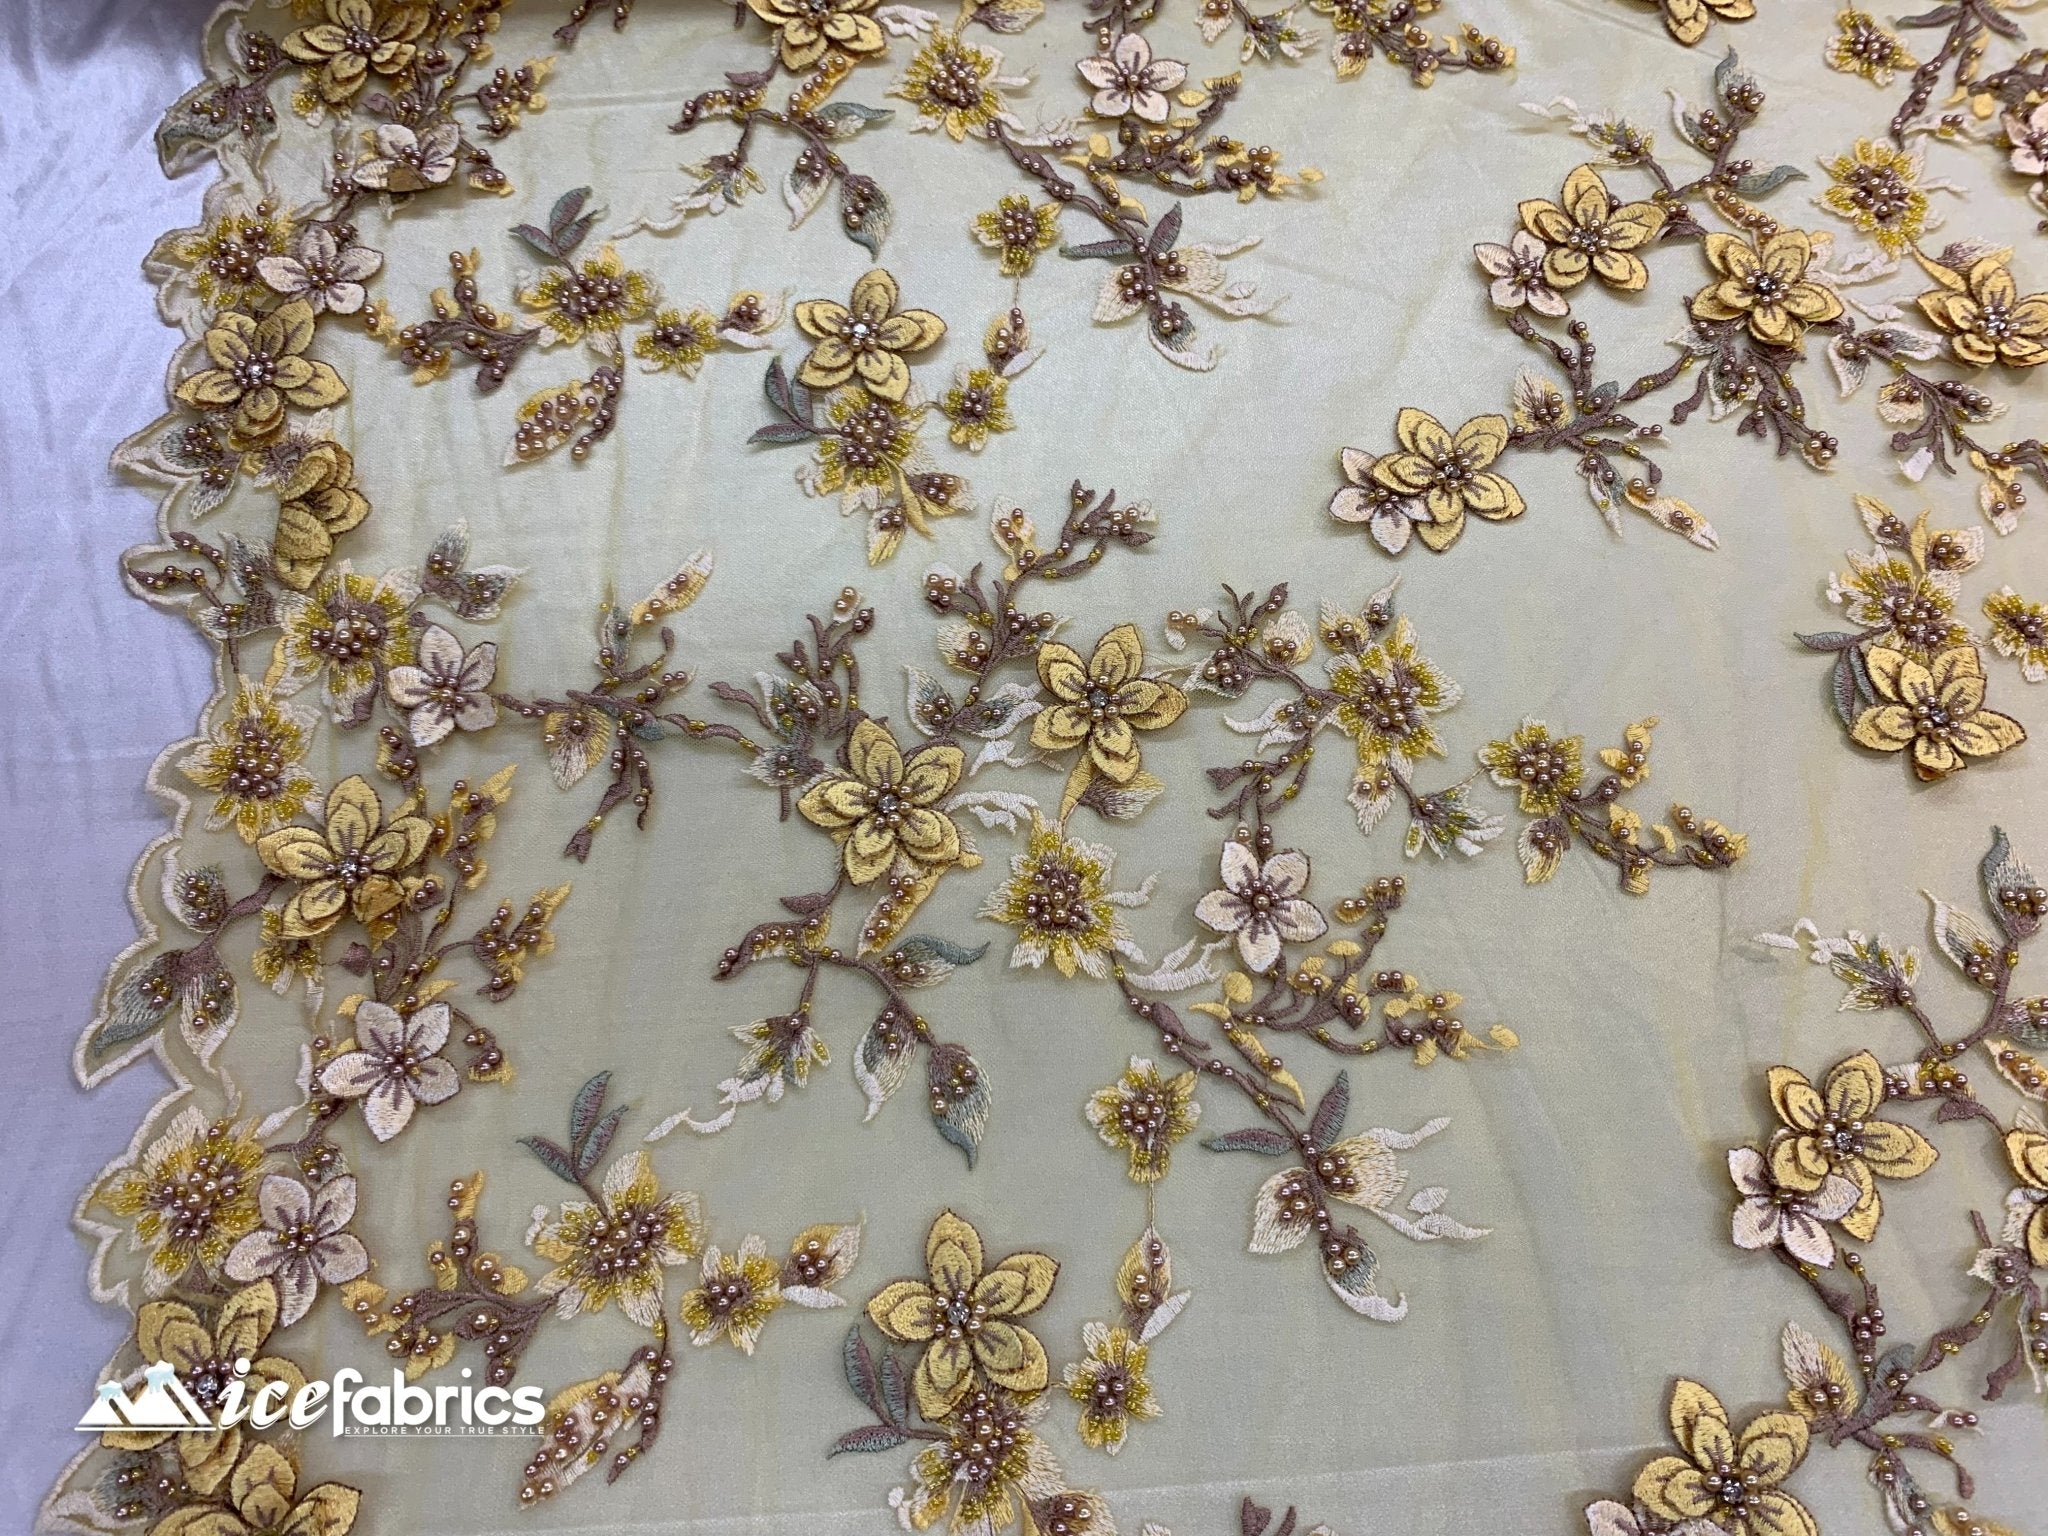 Flowers Embroidered Beaded Fabric/ Mesh Lace Fabric/ Bridal Fabric/ICE FABRICSICE FABRICSYellowFlowers Embroidered Beaded Fabric/ Mesh Lace Fabric/ Bridal Fabric/ ICE FABRICS Yellow